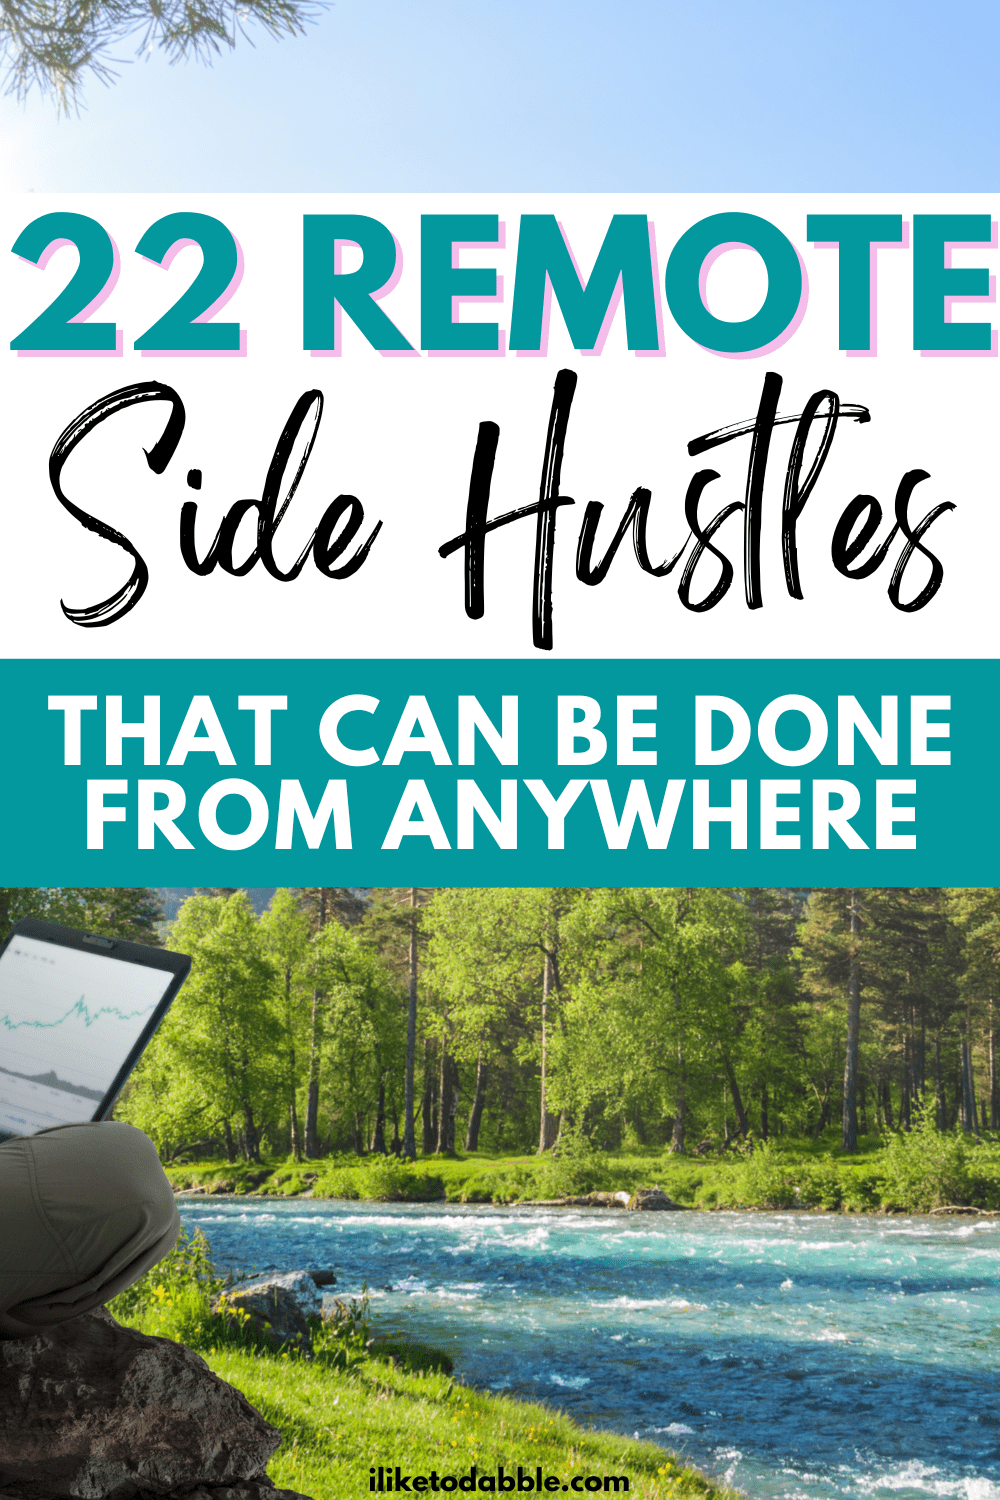 Person with a laptop by a stream with title text overlay that reads "22 Remote Side Hustles That Can Be Done From Anywhere"